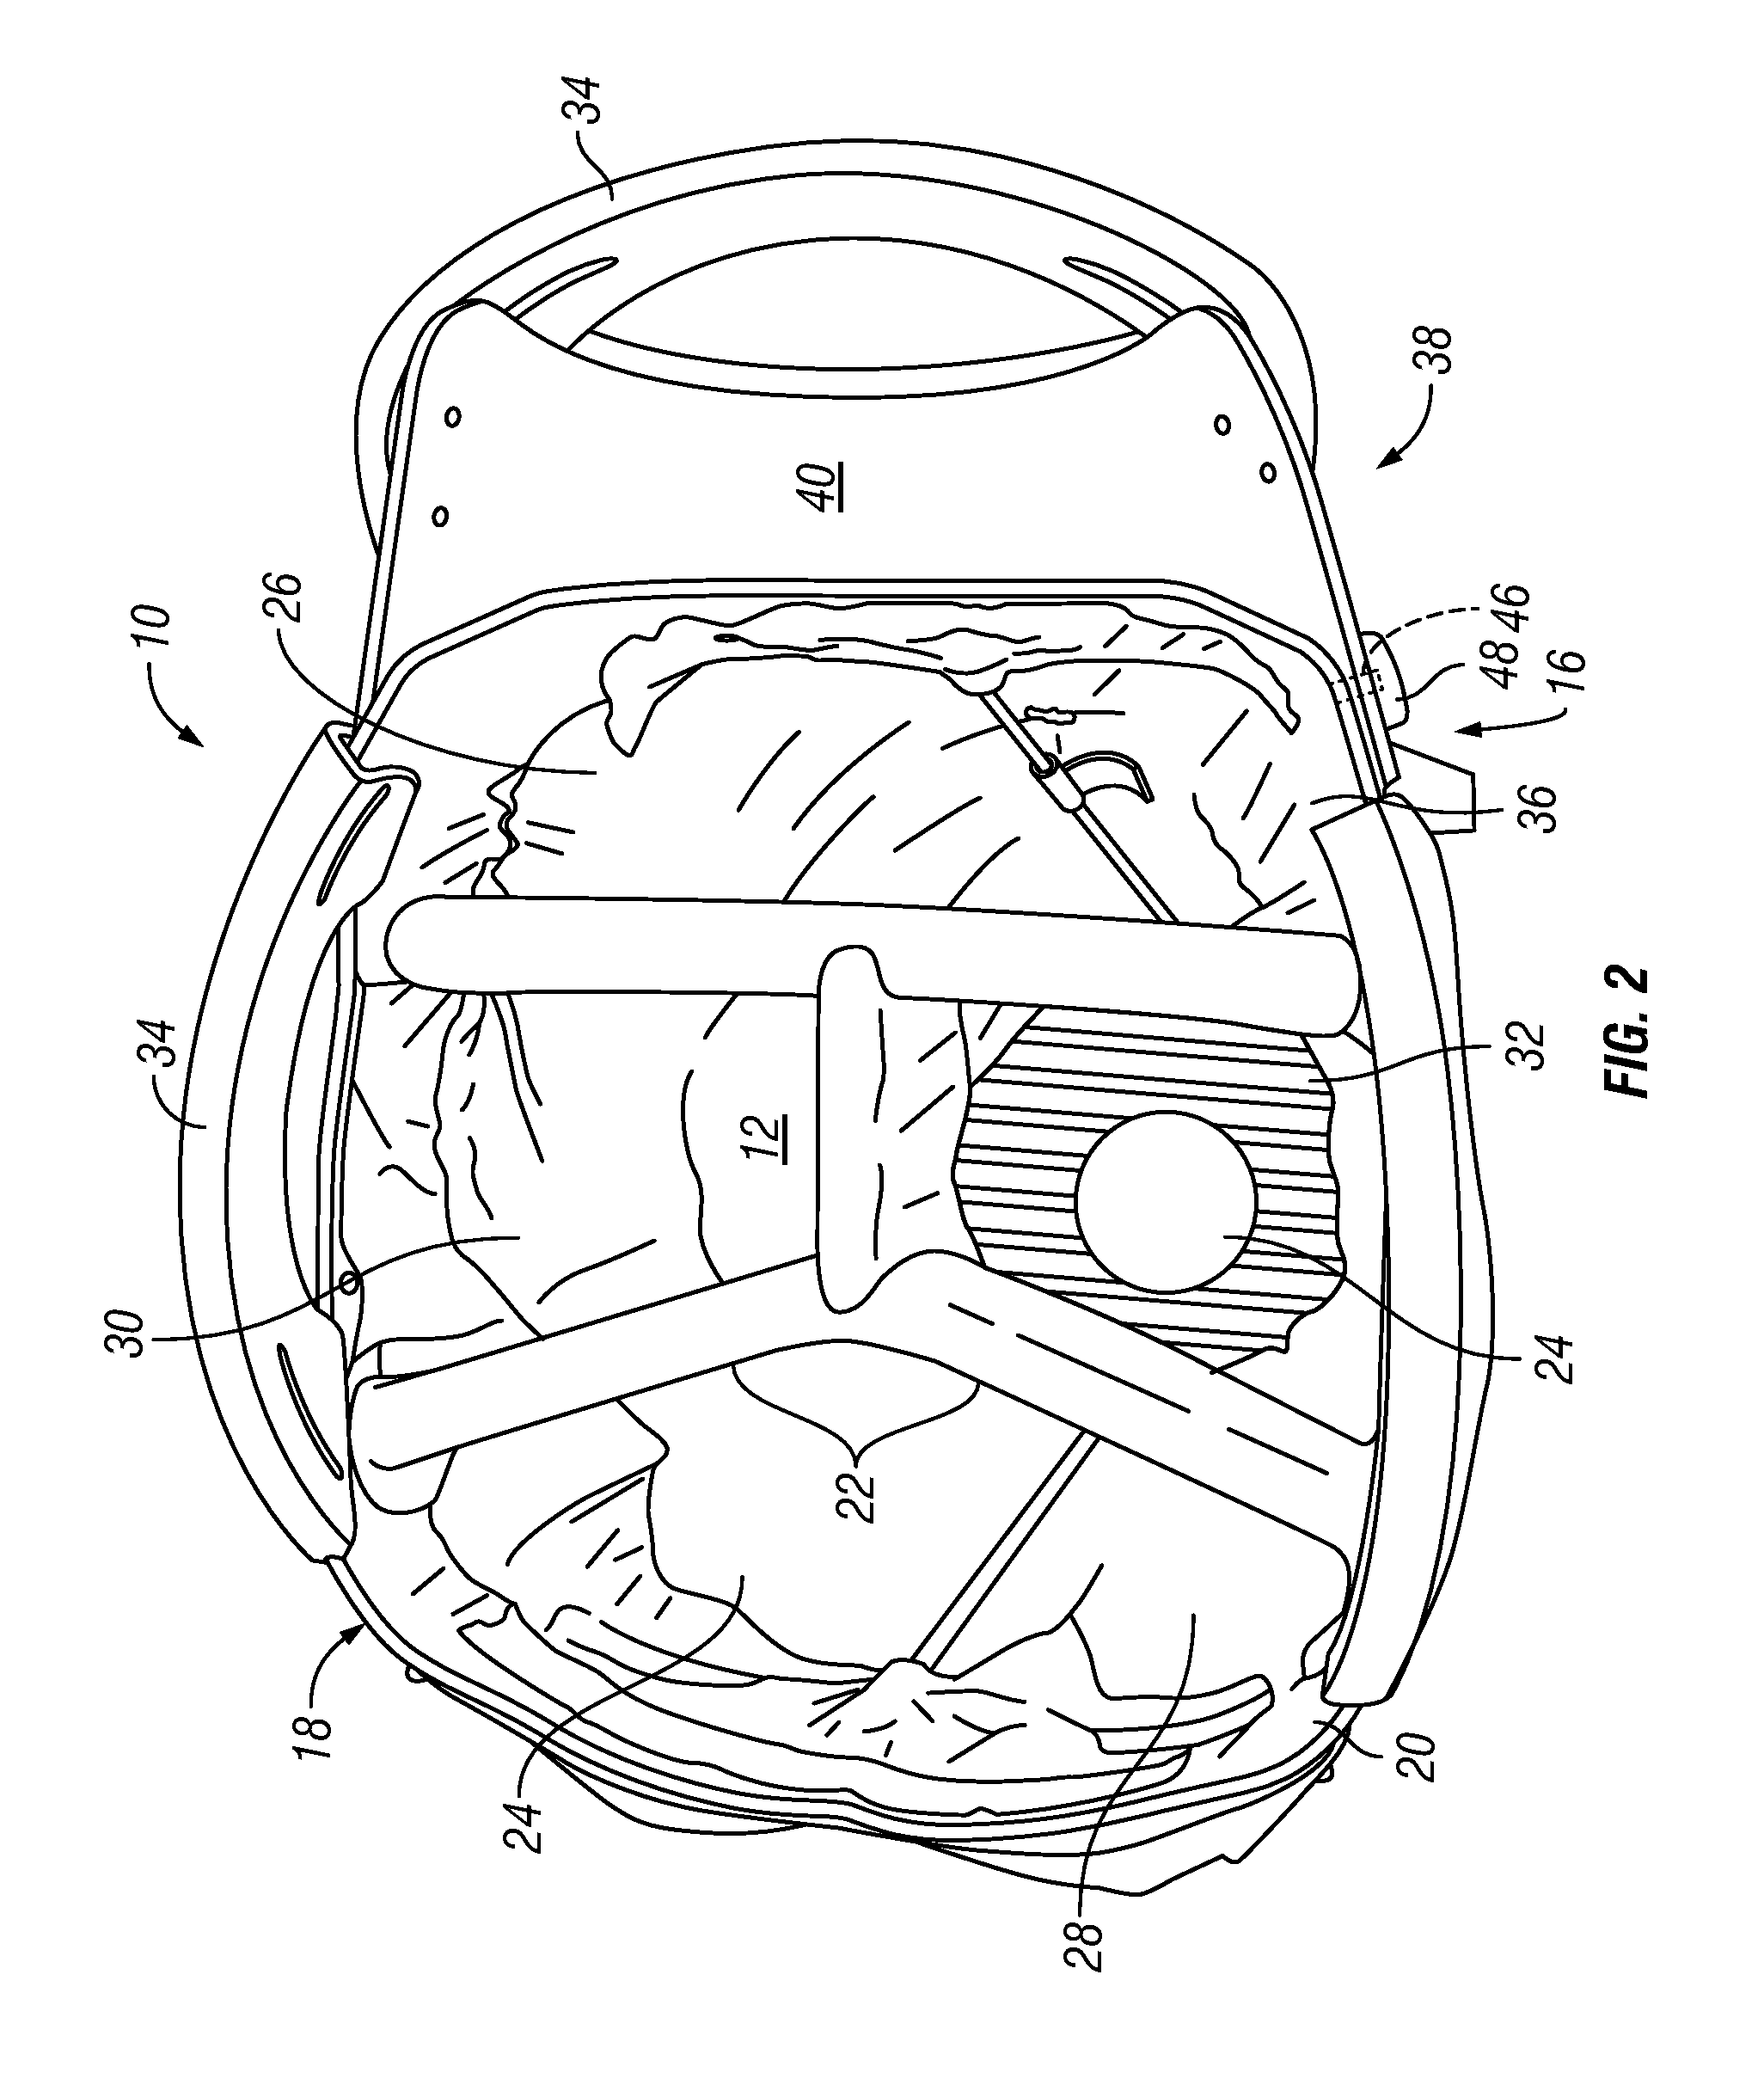 Golf bag with expandable collar apertures